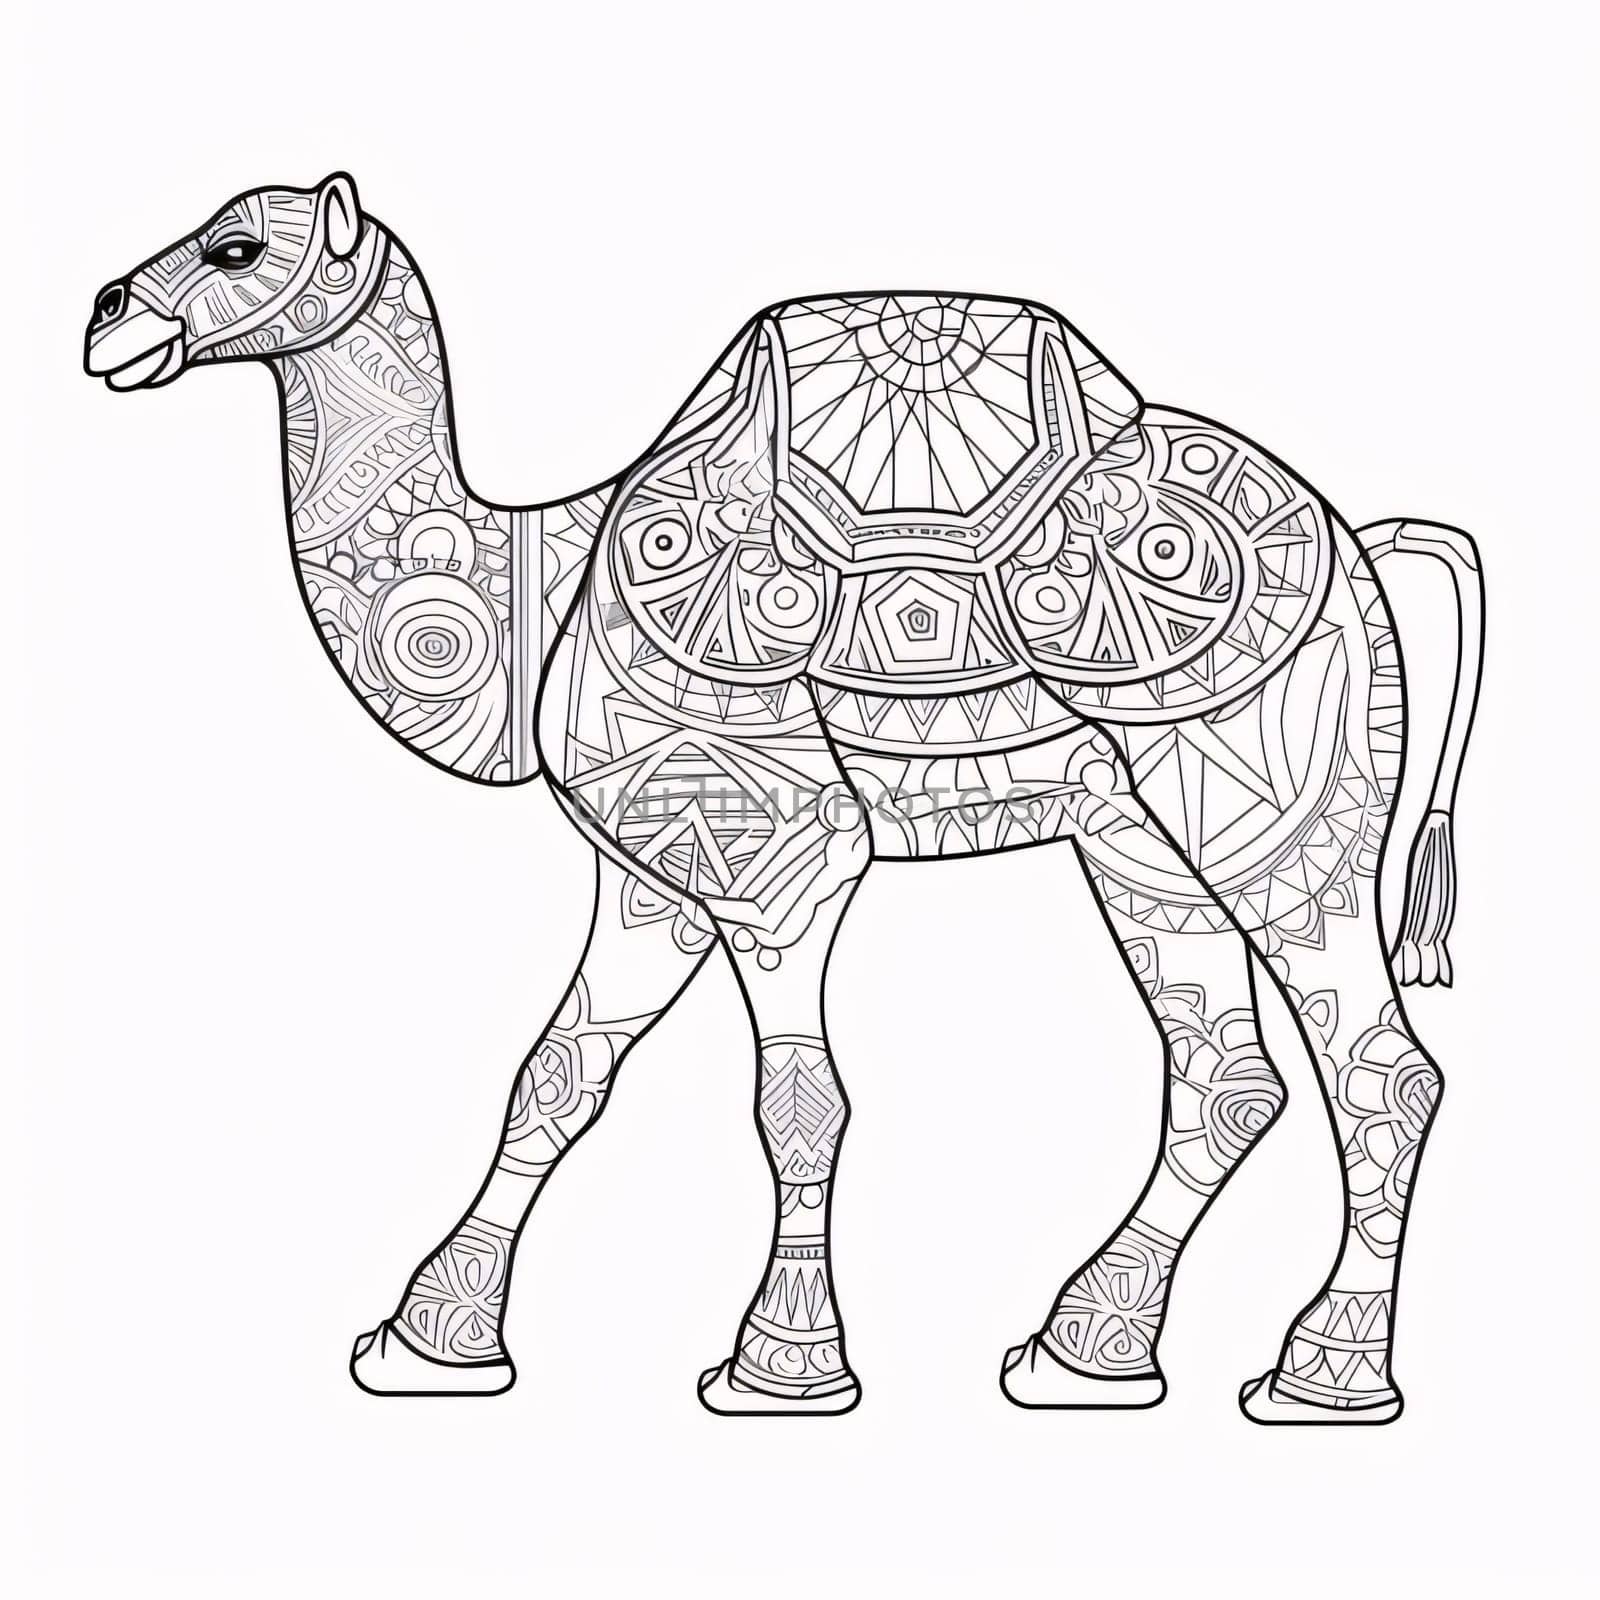 Black and White coloring page. A camel with decorations. Ramadan as a time of fasting and prayer for Muslims. by ThemesS